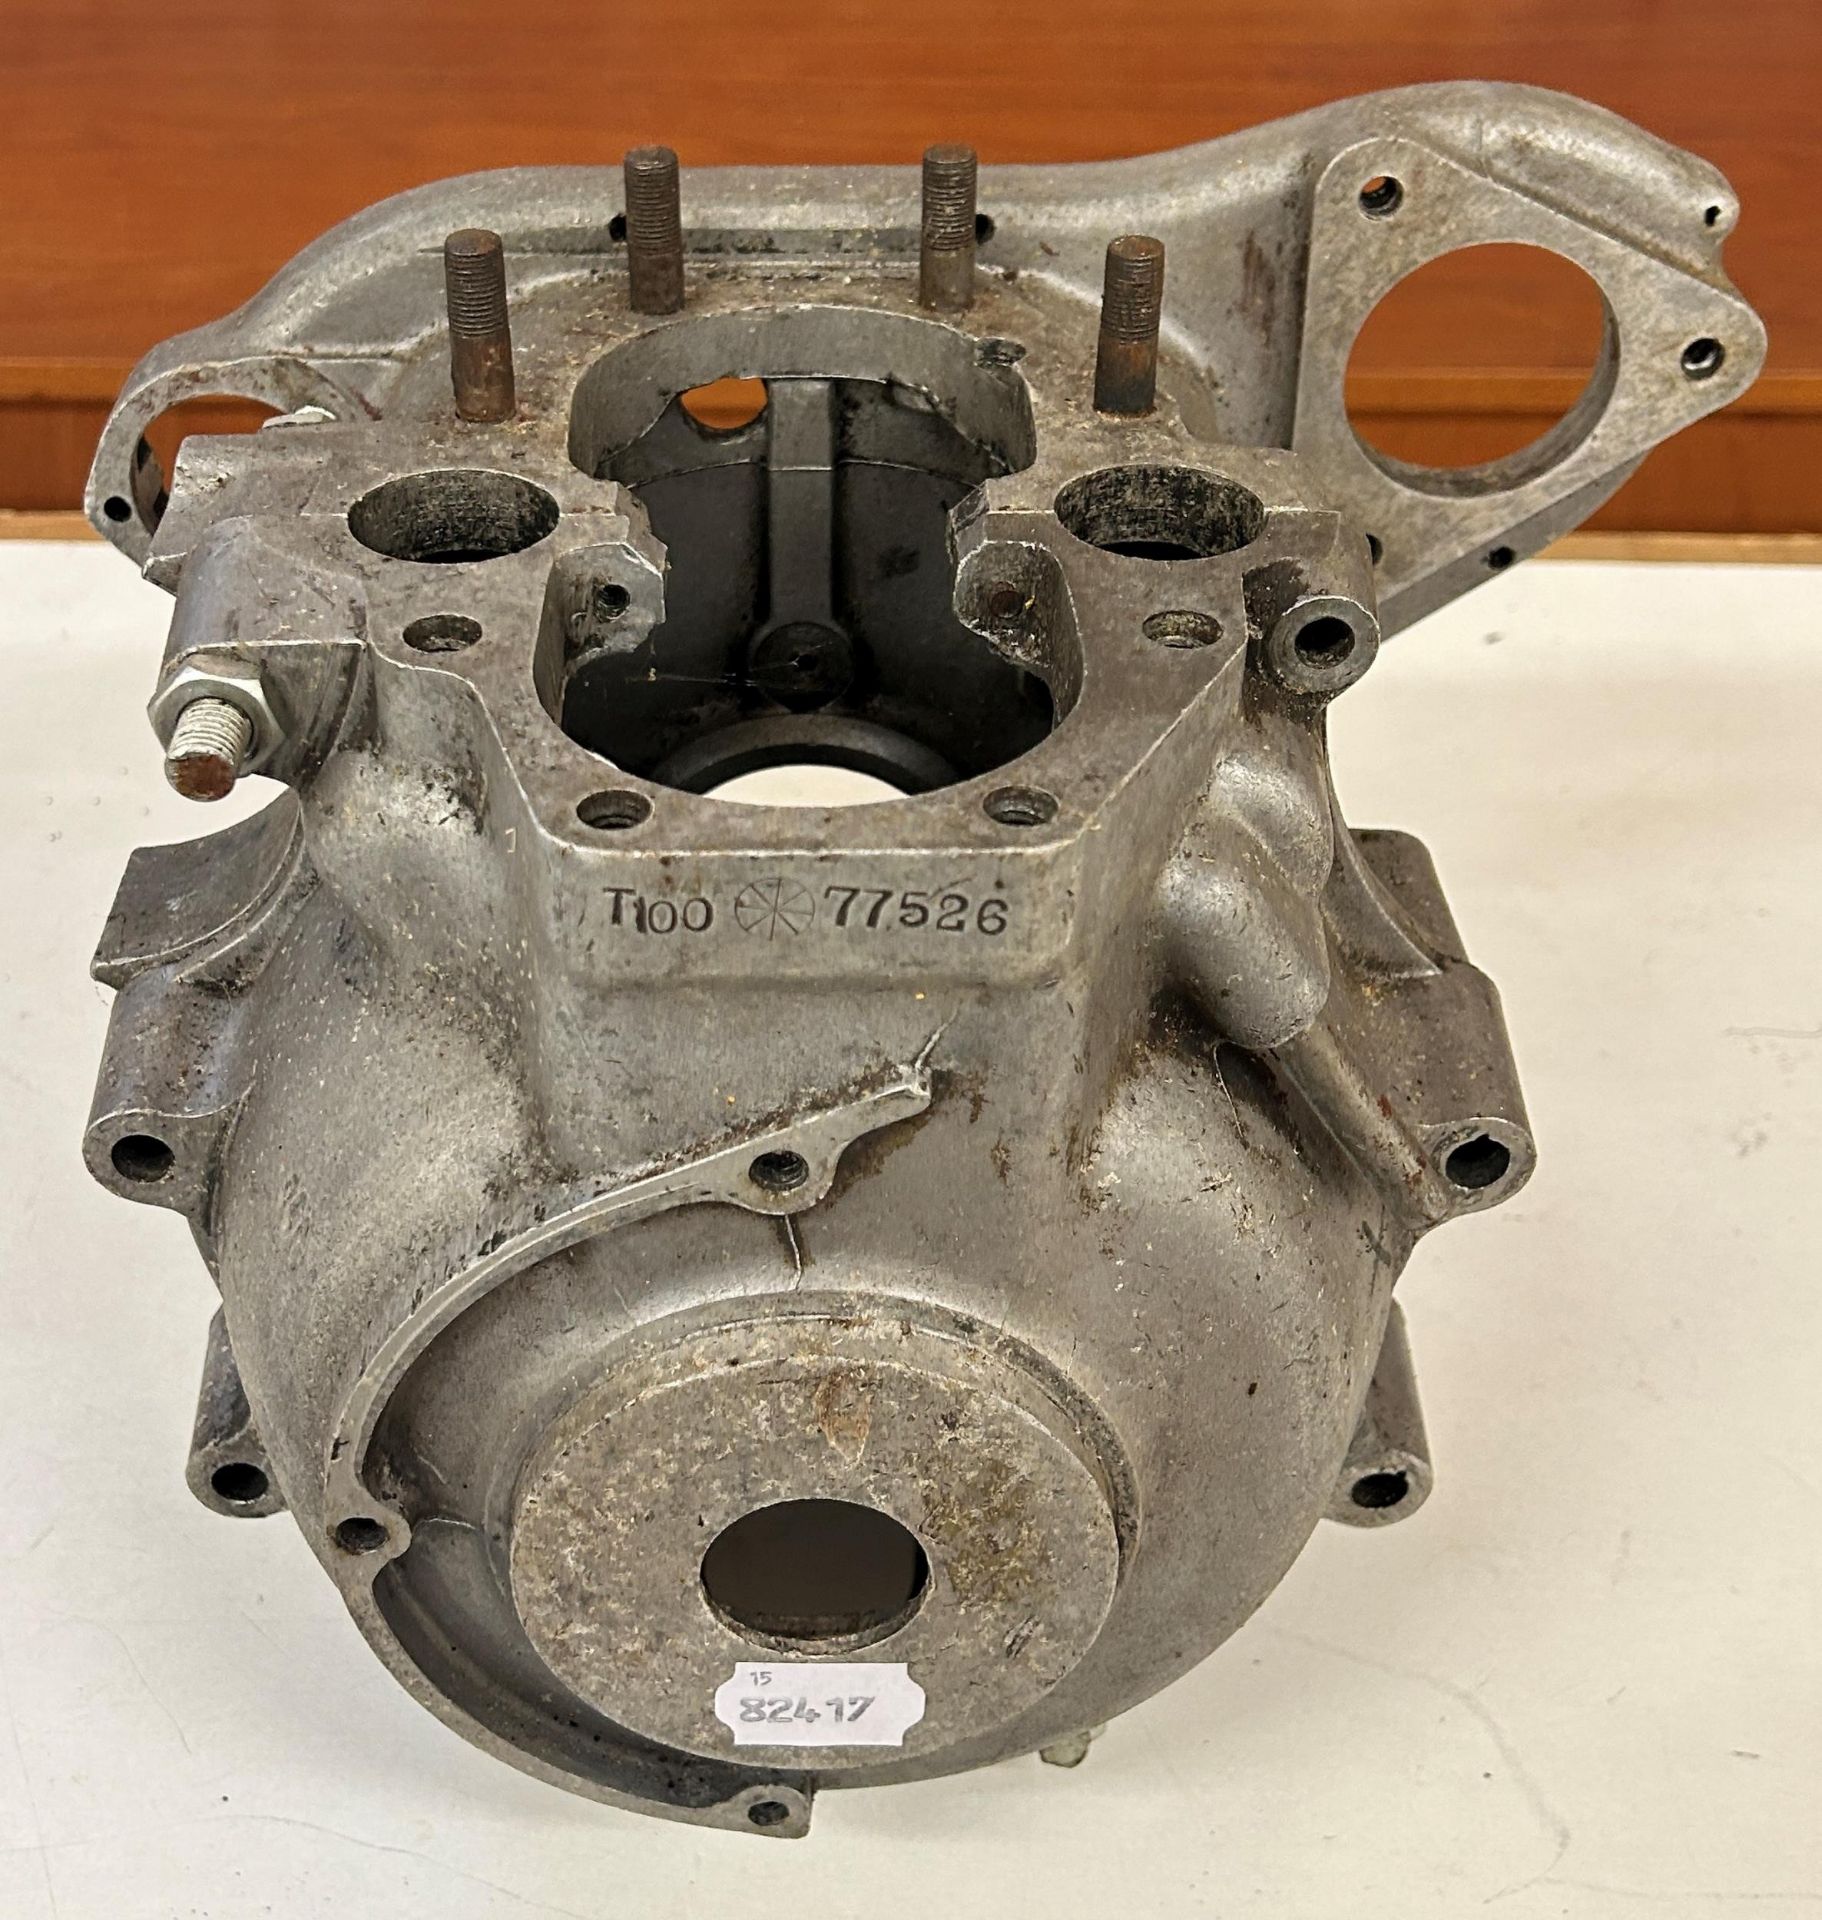 A Triumph T100 motorcycle engine casing, stamped T100 77526